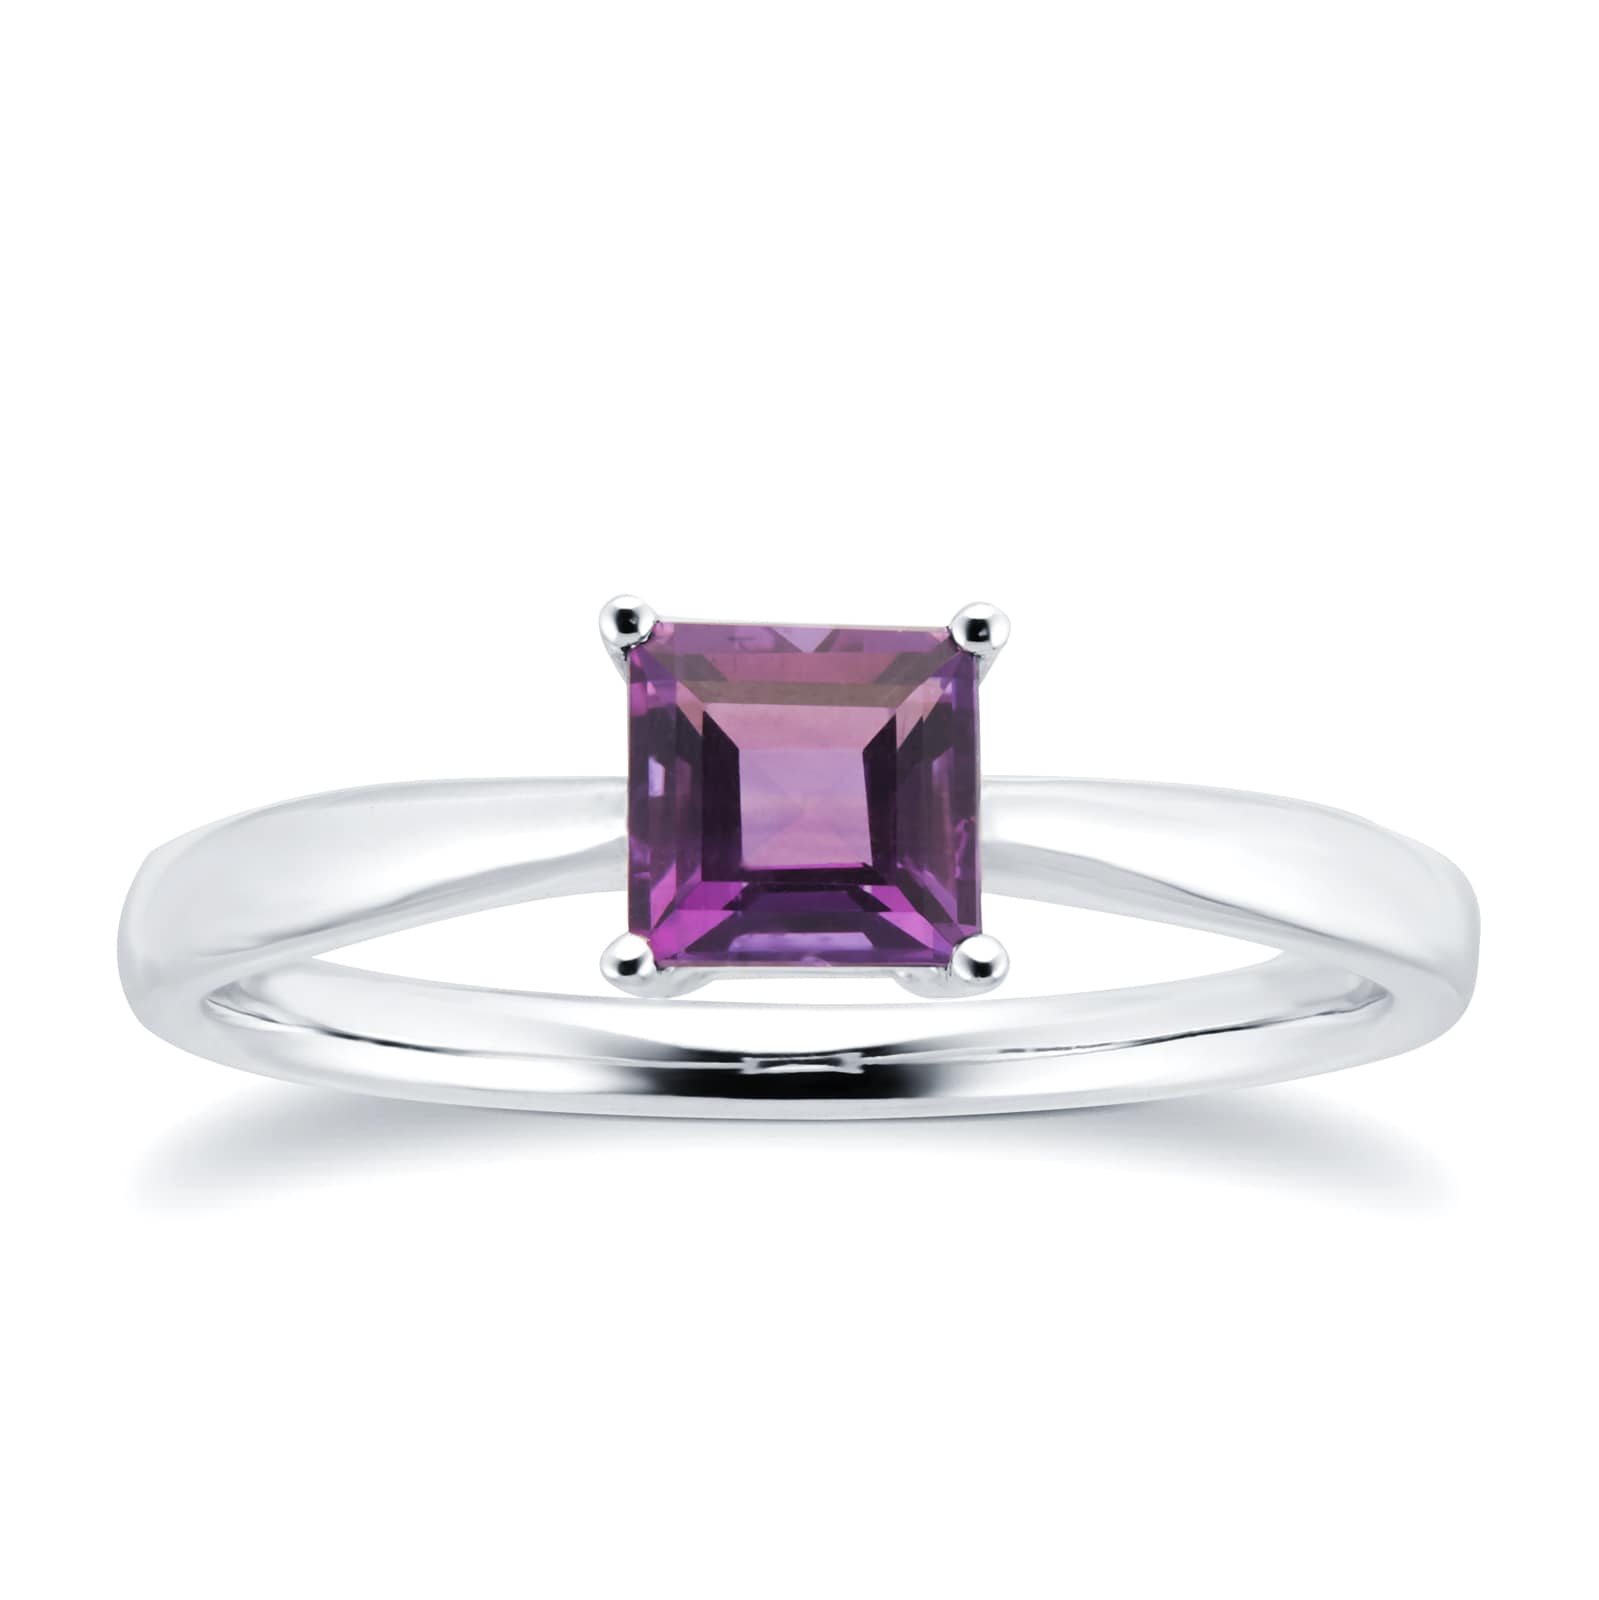 9ct White Gold 4 Claw Square Amethyst 5mm x 5mm Ring- Ring Size S